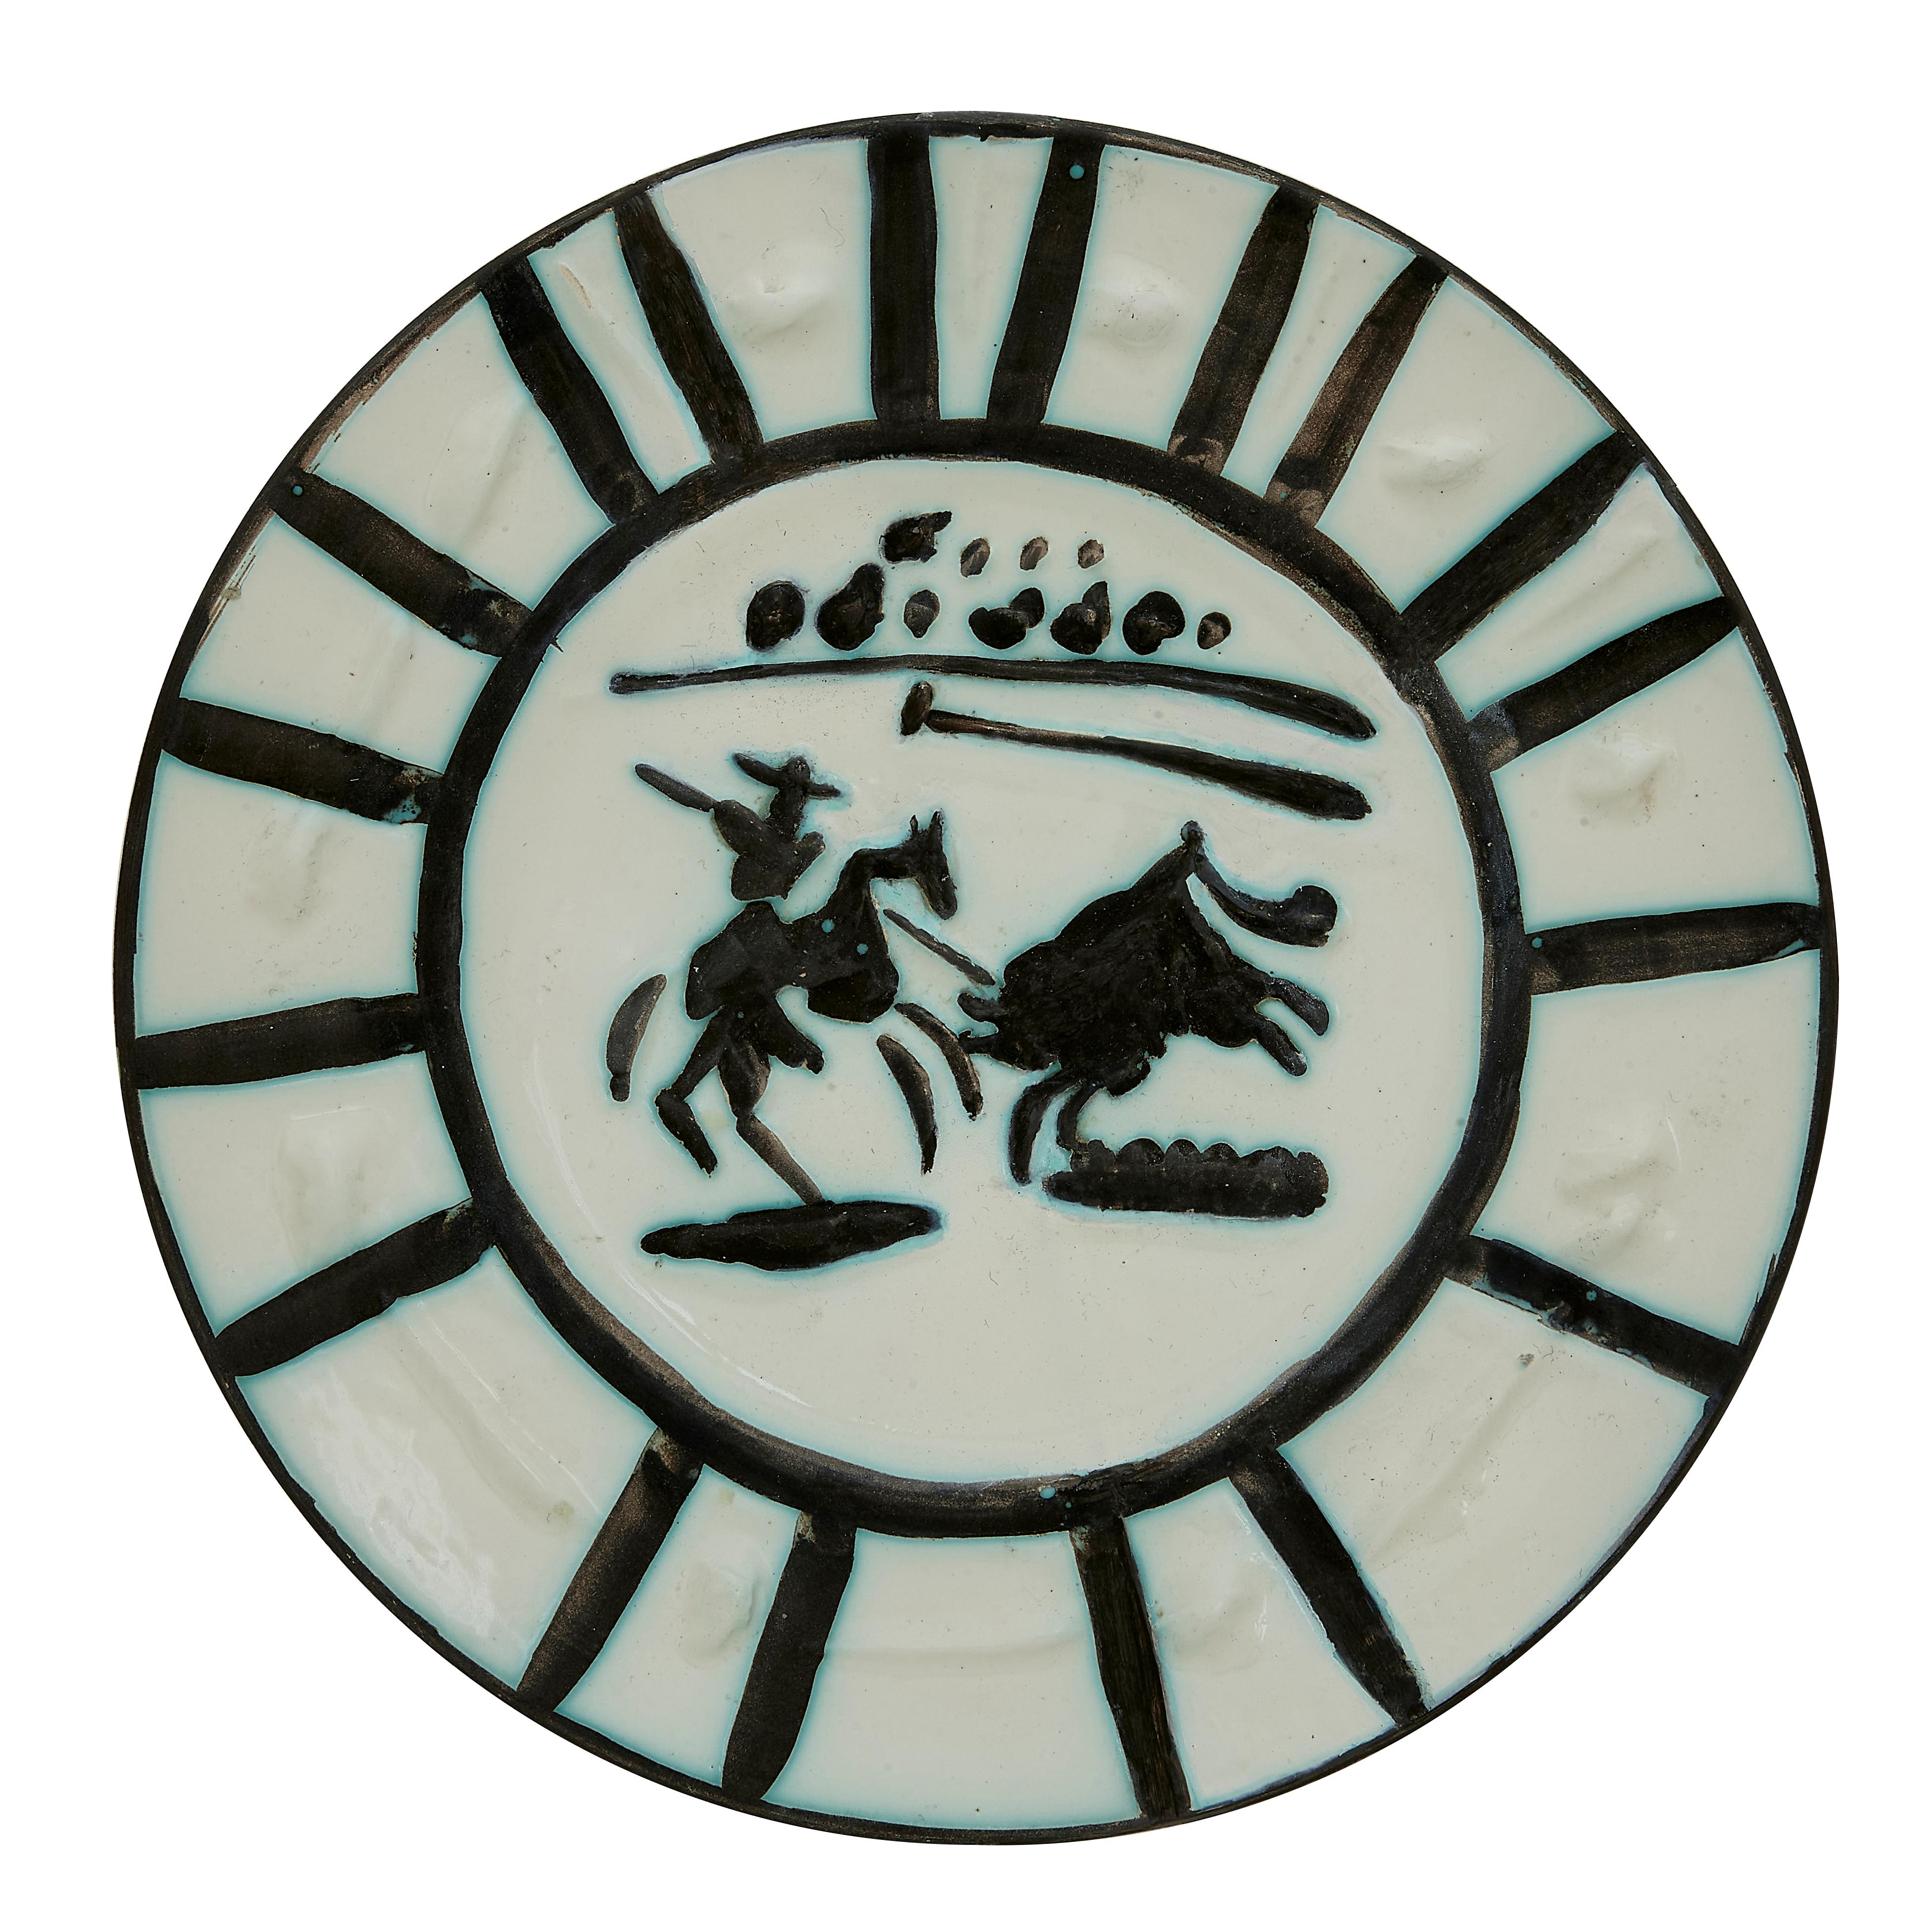 PABLO PICASSO (1881-1973) 
Picador (A. R. 201)

Terre de faïence plate, 1953, numbered 153/200, partially glazed and painted, with the Empreinte Originale de Picasso and Madoura stamps.